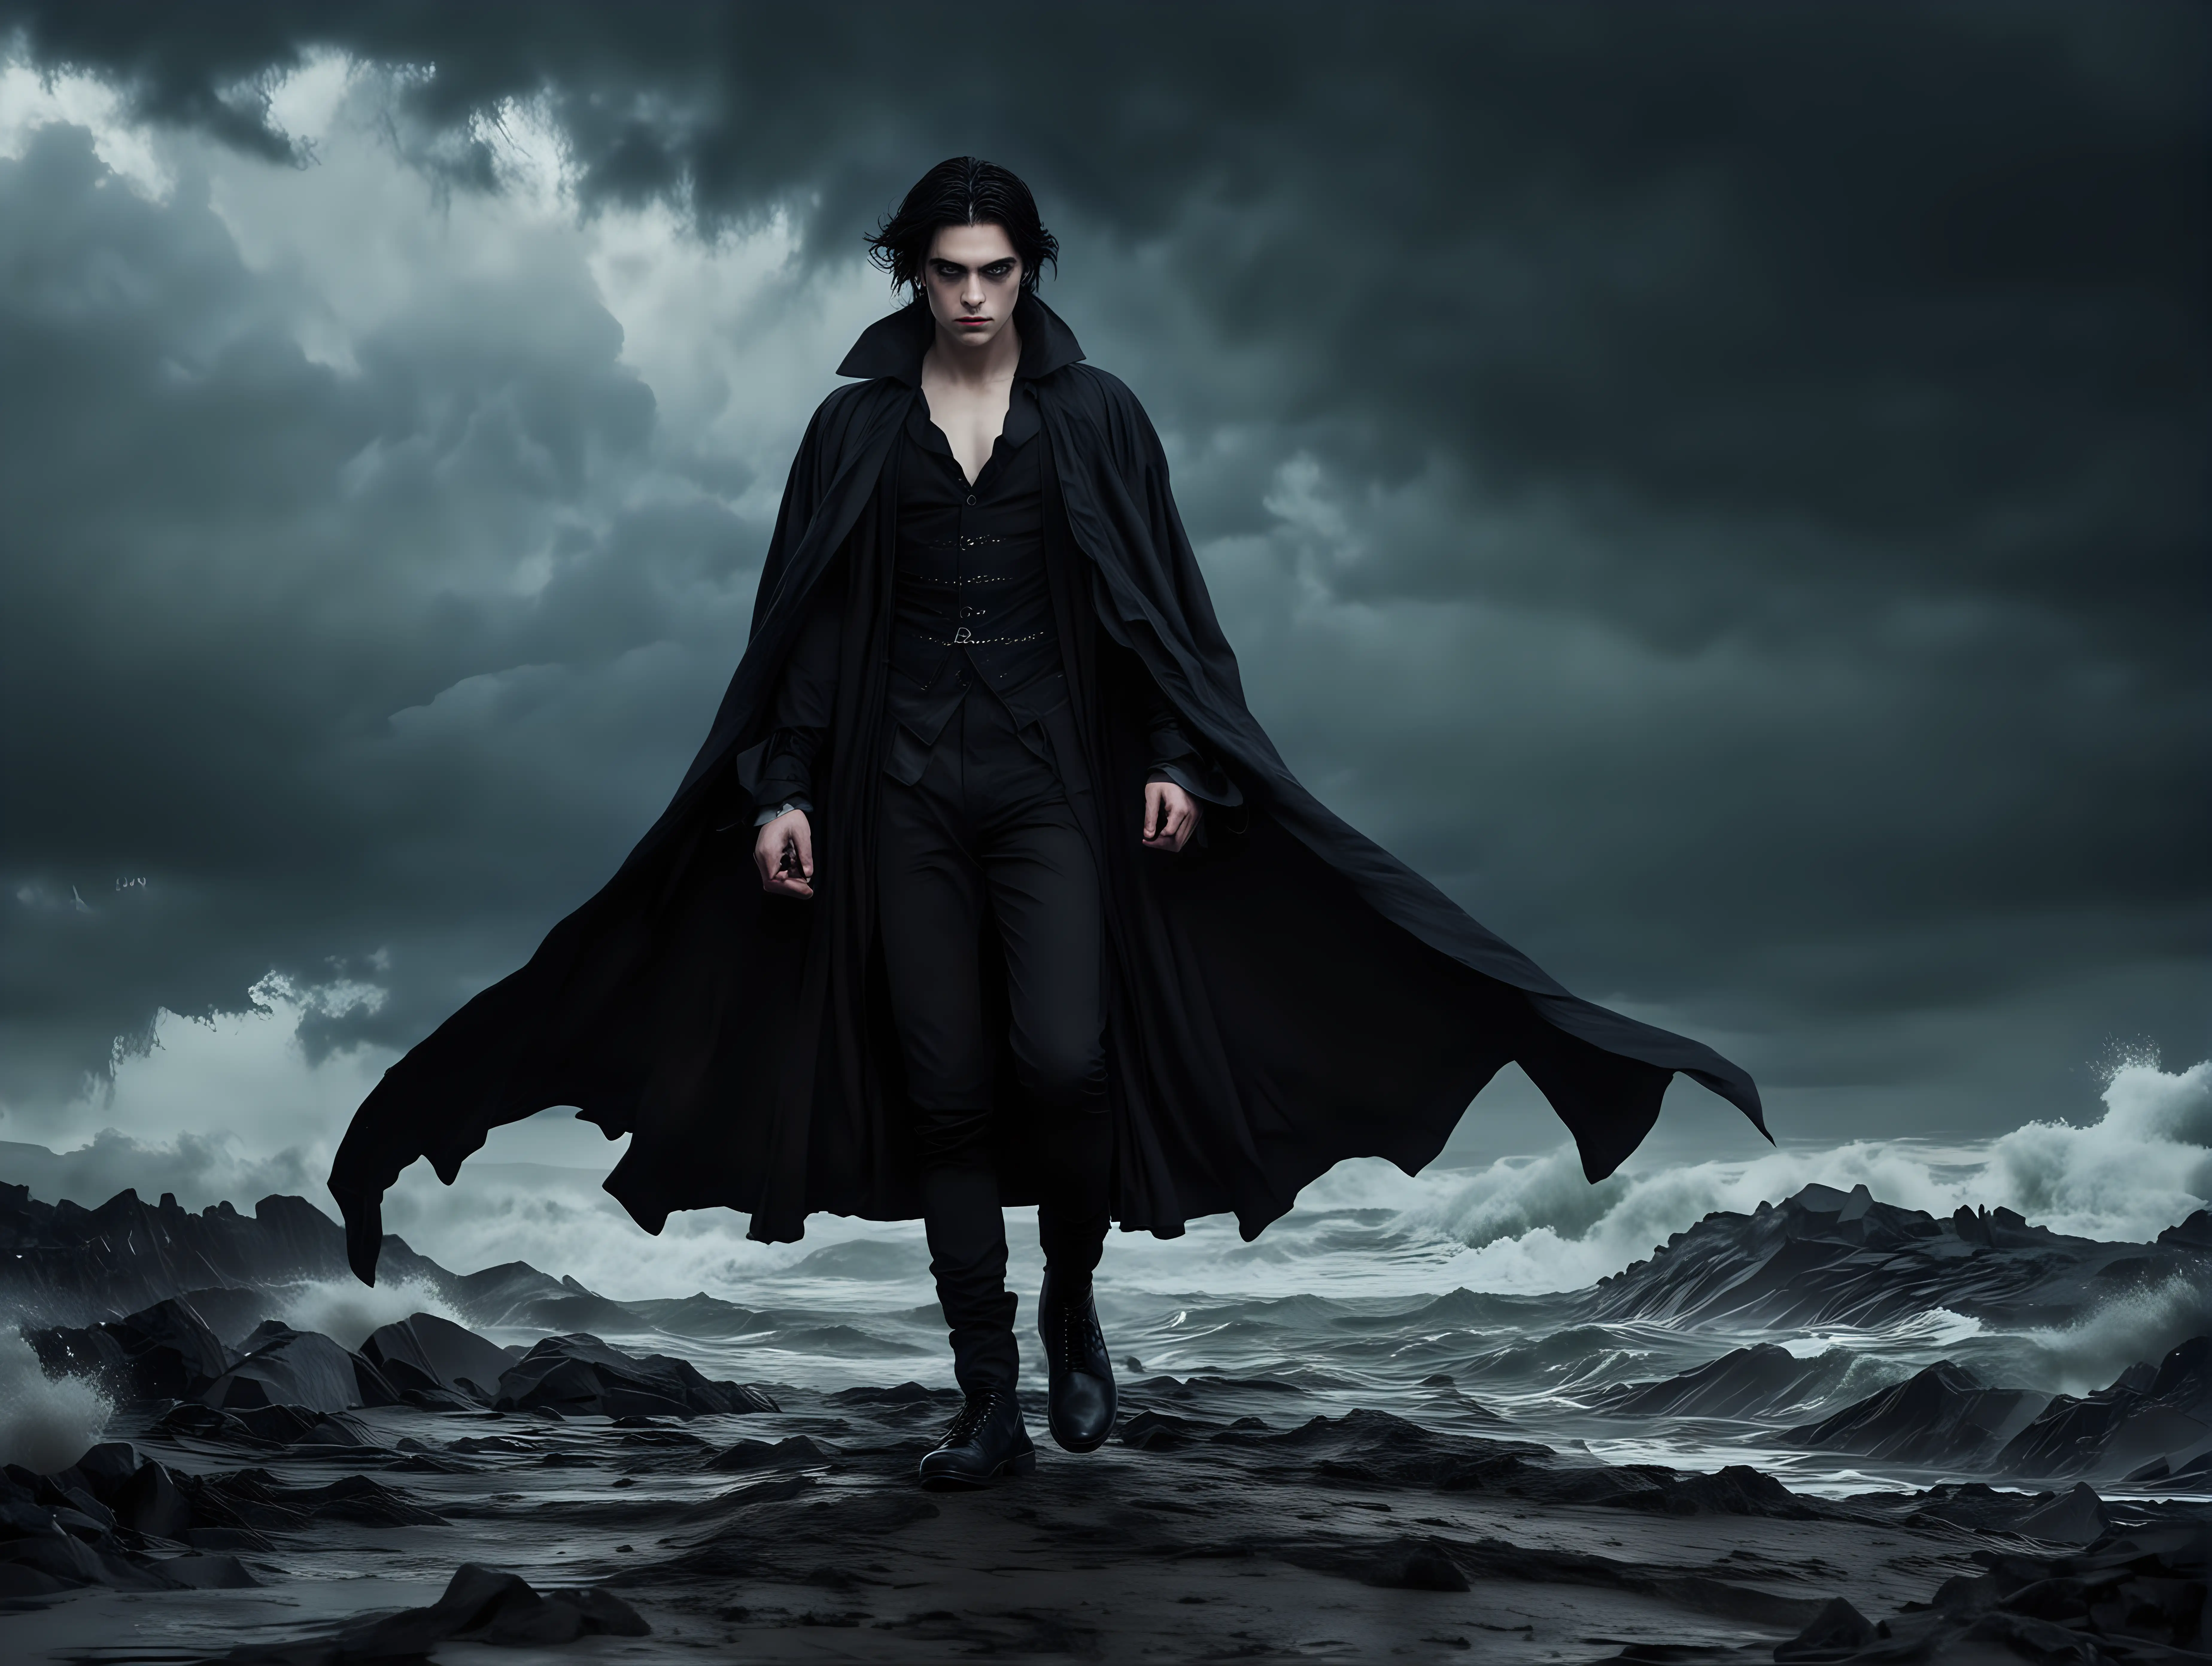 A_young_vampire_in_a_black_cloak_and_black_shoes_with_black_hair_blue_eyes_against_the_backdrop_of_a_storm__